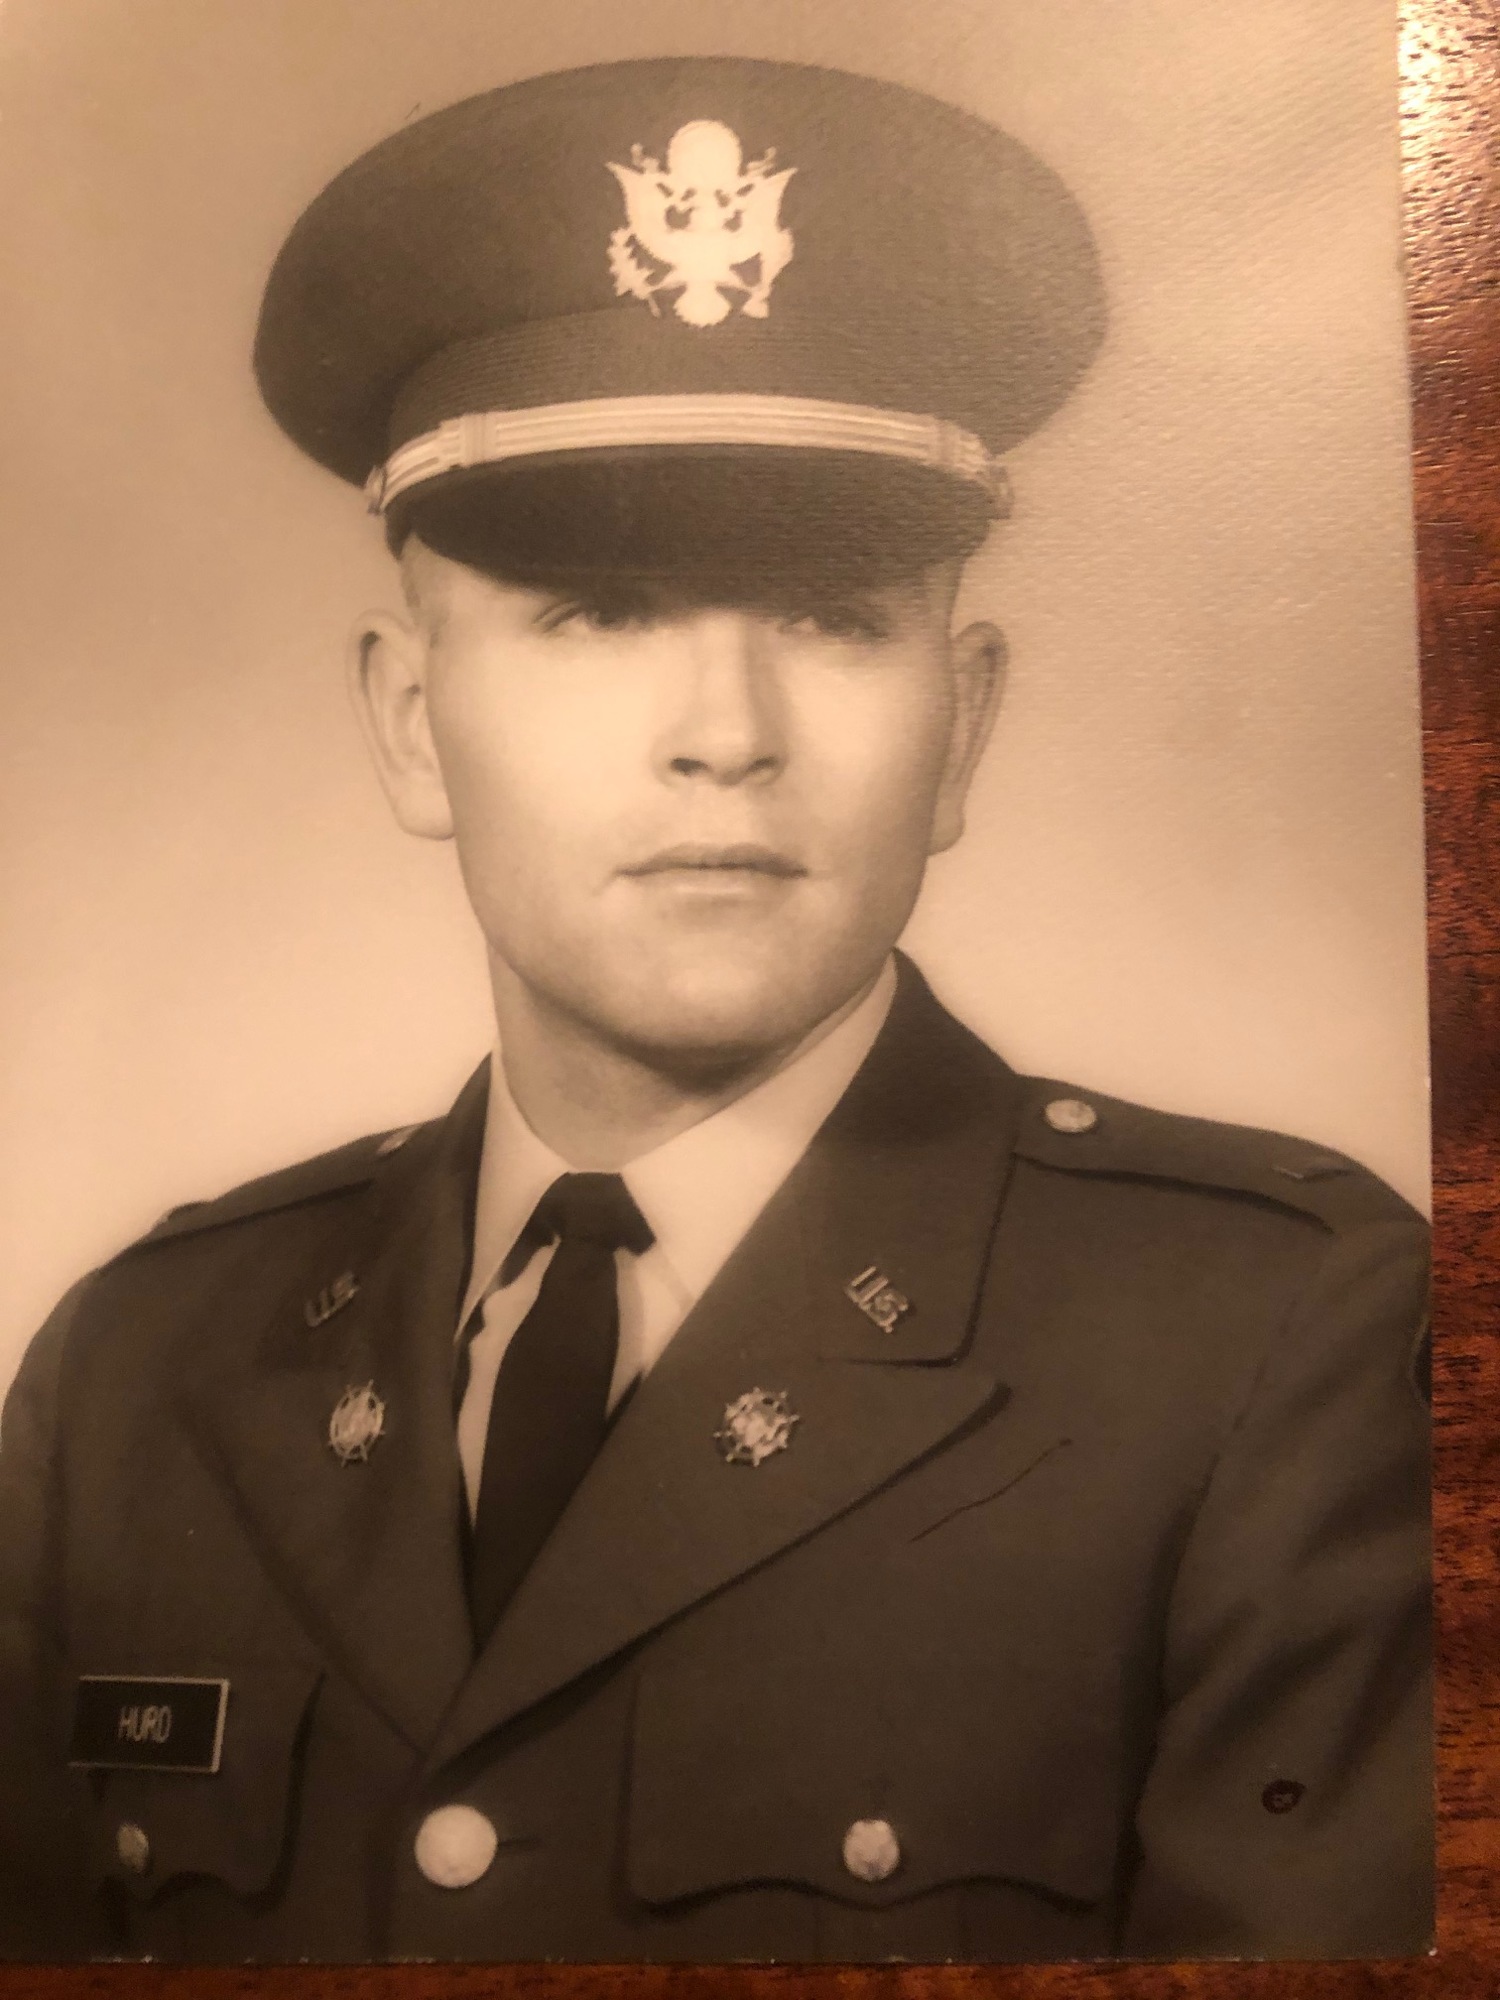 Richard Hurd in 1967 after his graduation from the Army's Officer Candidate School in Fort Benning, Ga..